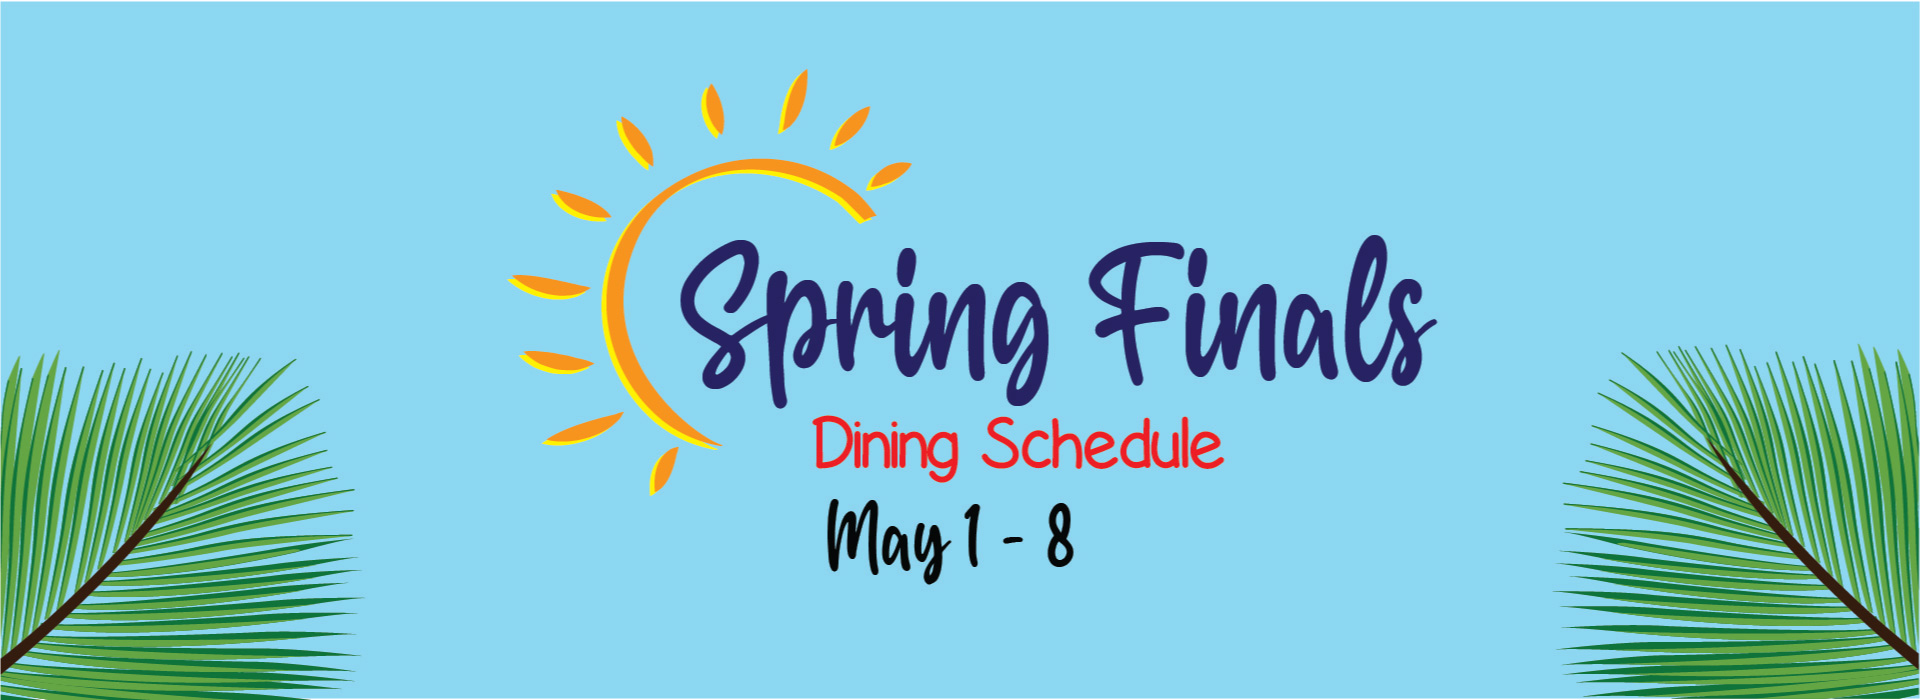 Spring Finals Dining Schedule May 1 - 8